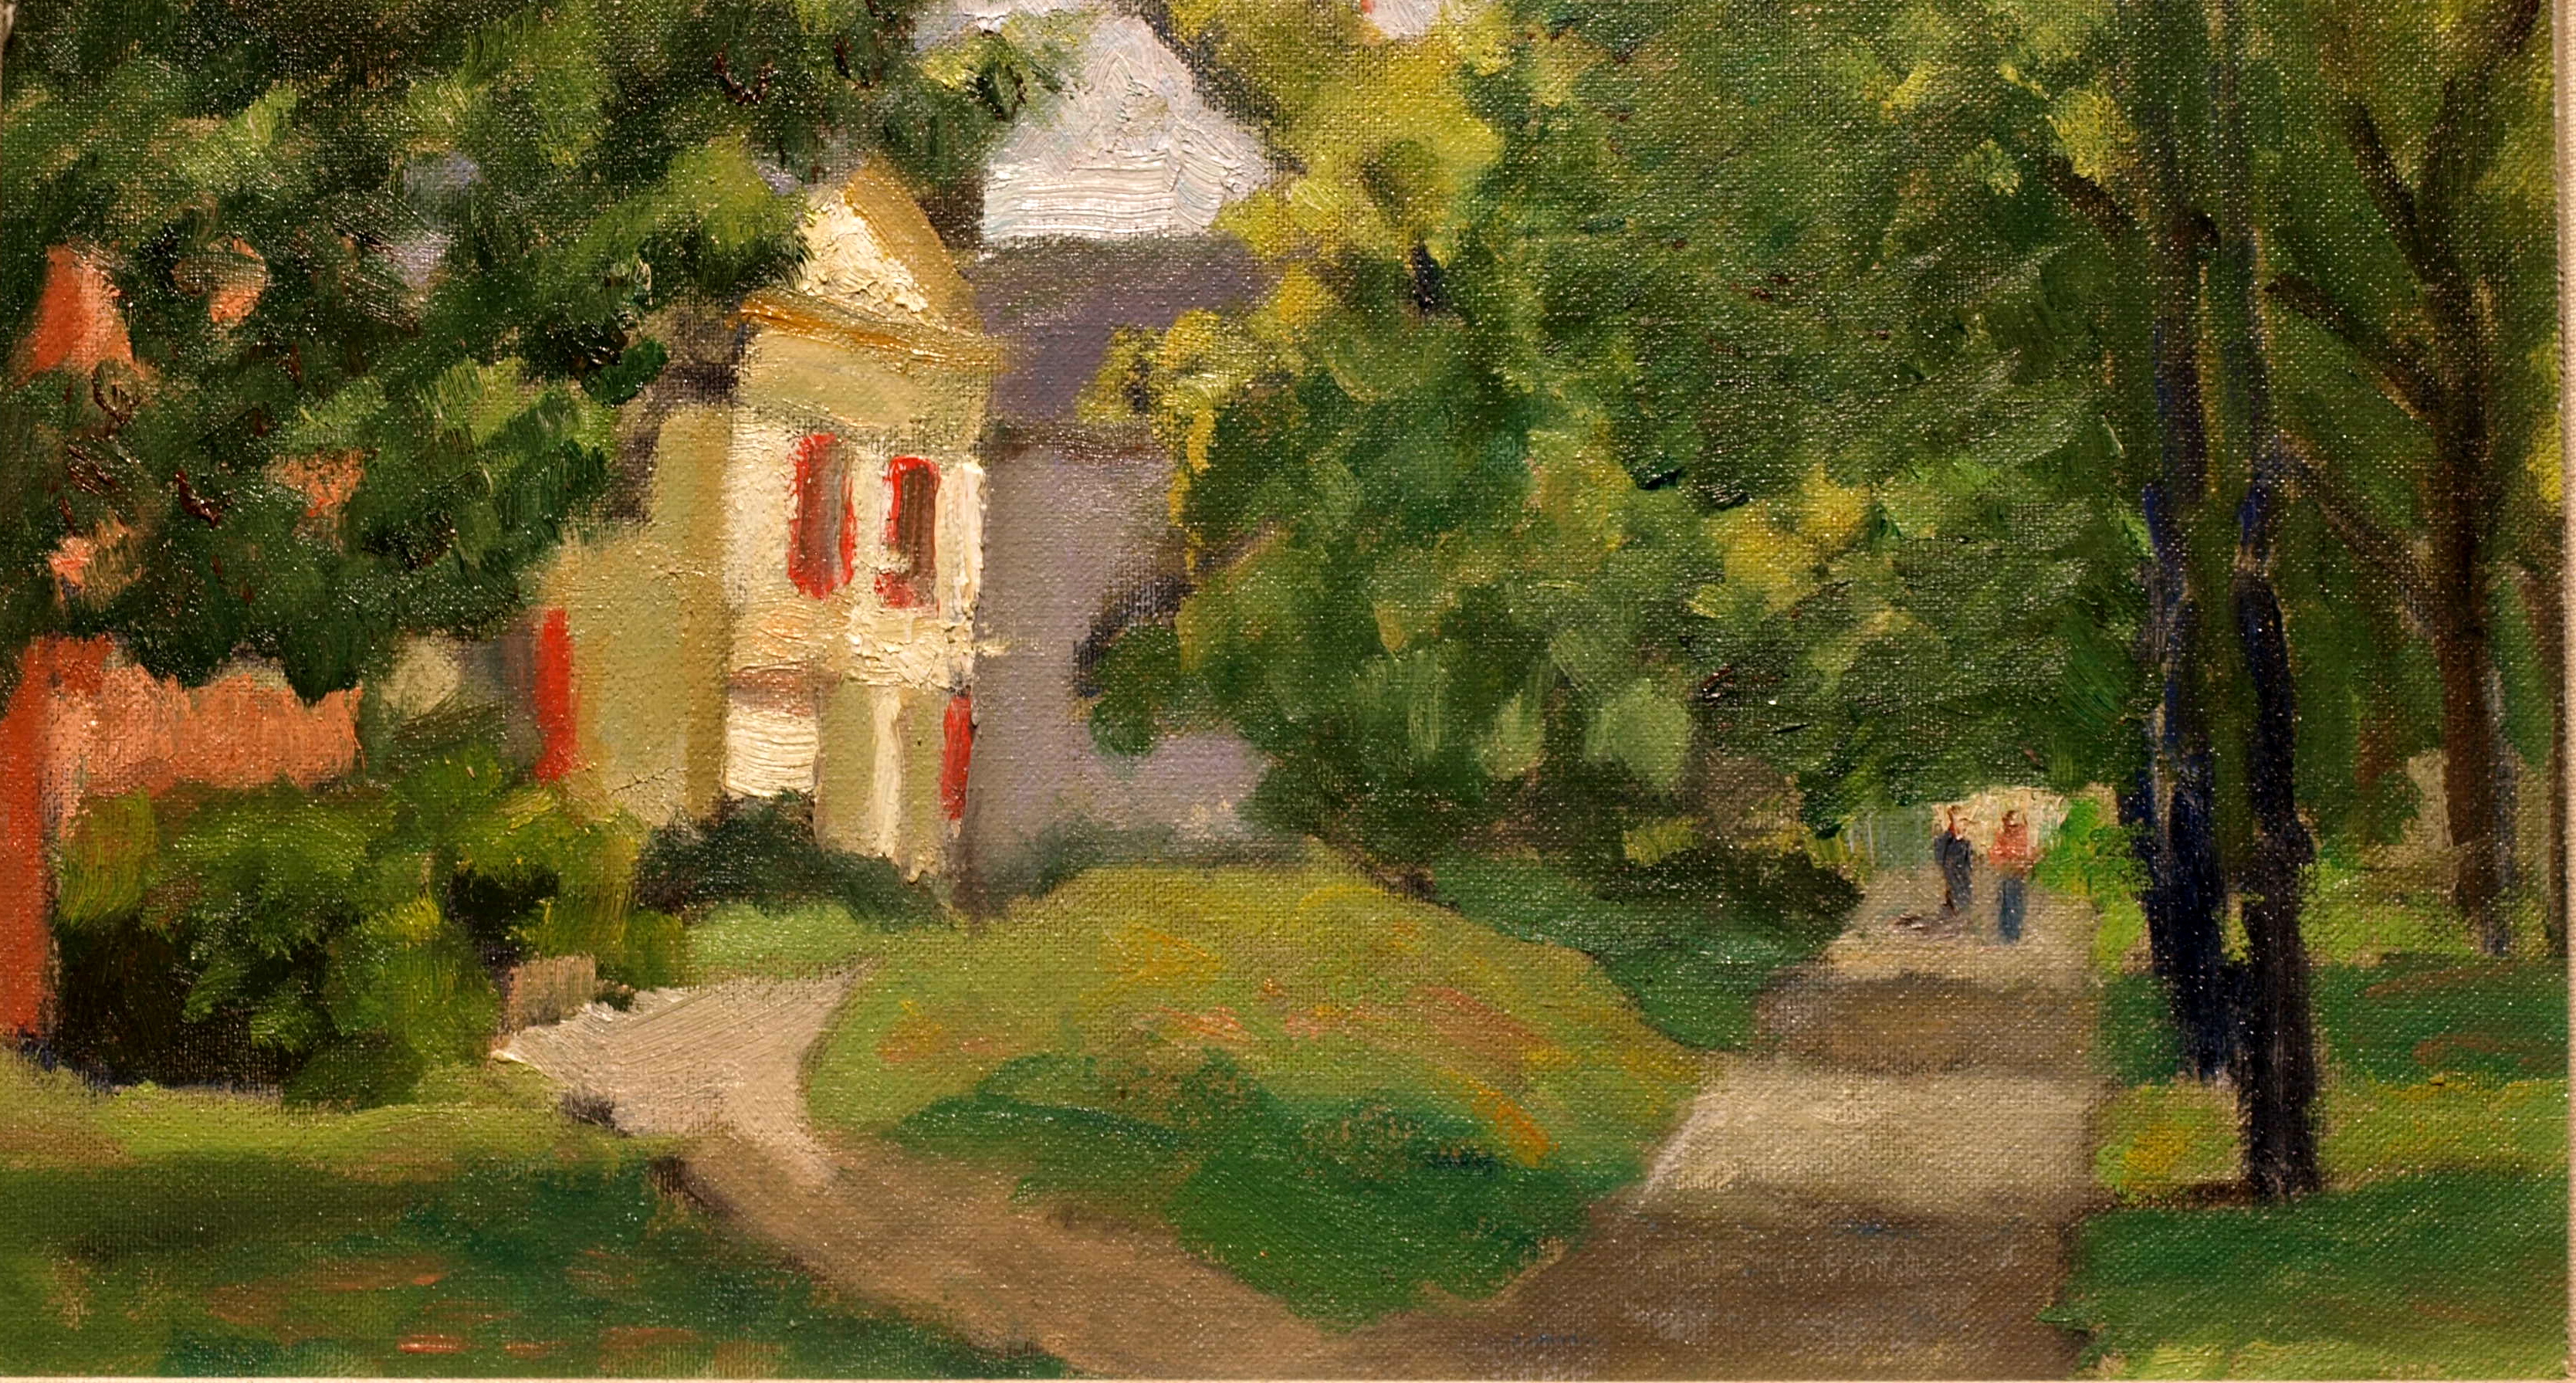 Midsummer in New Milford, Oil on Canvas on Panel, 8 x 14 Inches, by Richard Stalter, $220